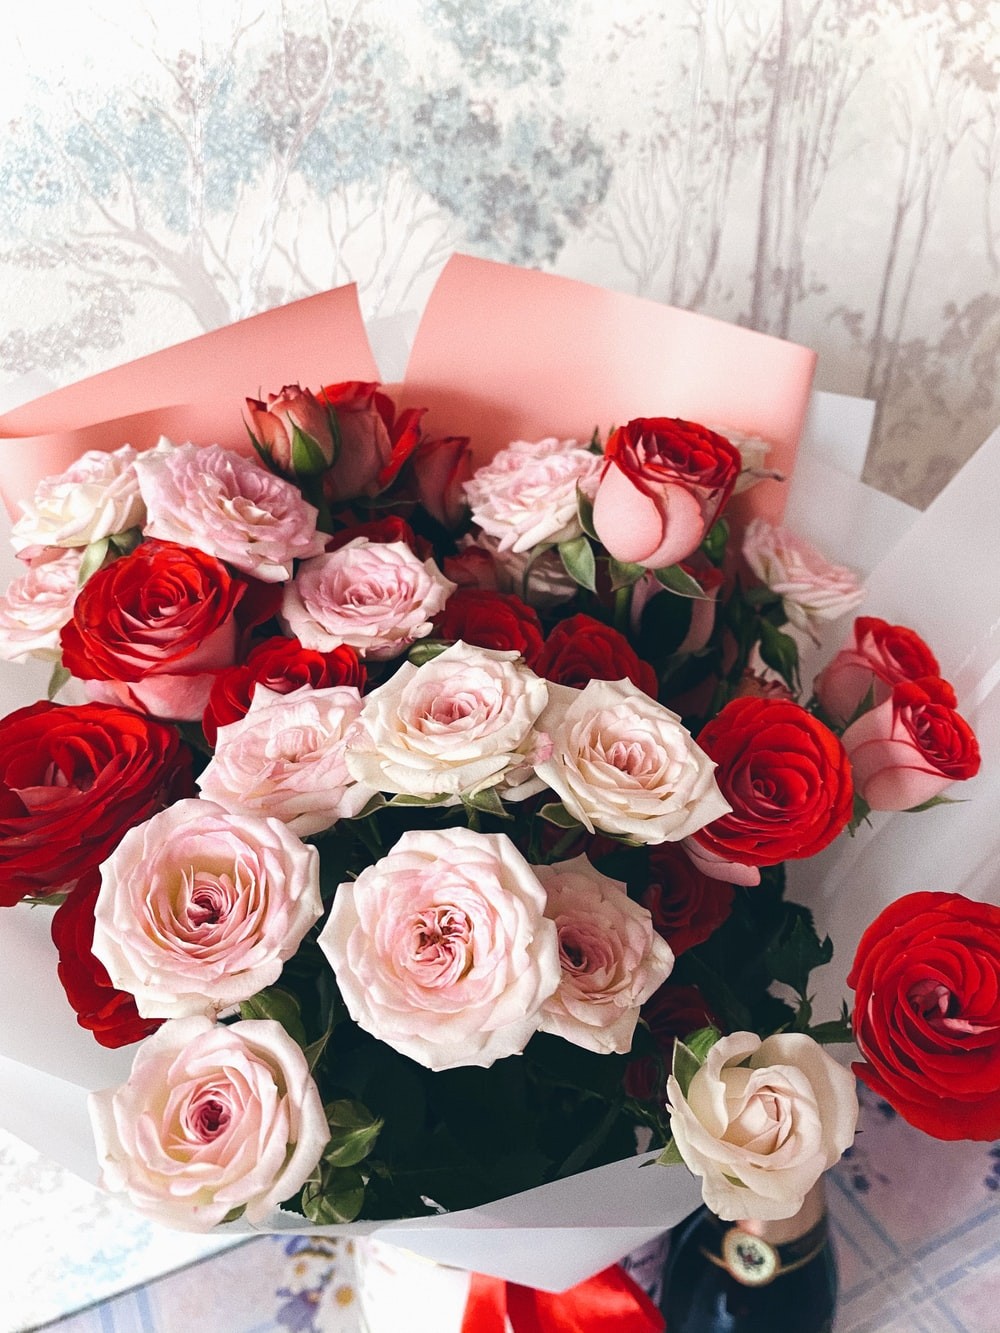 Happy Woman’s Day: Meaningful Flowers For Your Loved Ones